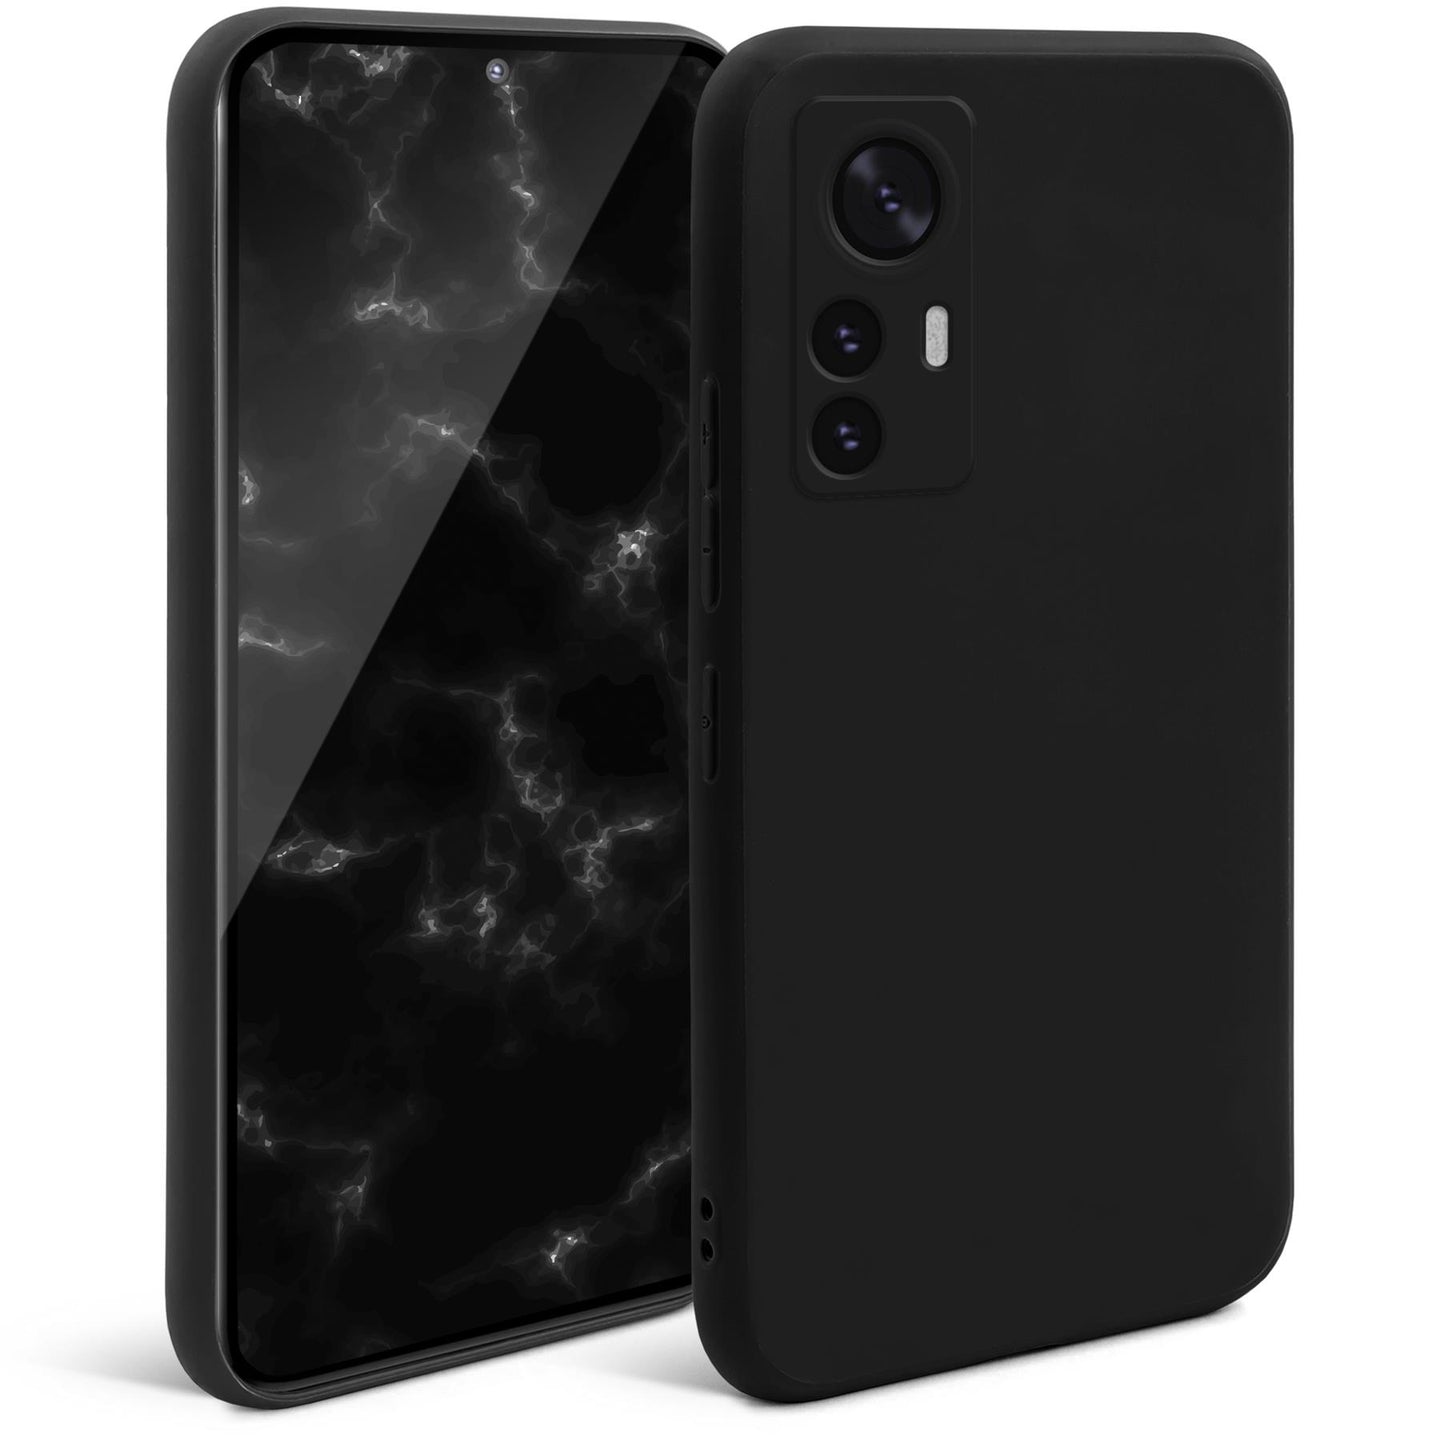 Moozy Minimalist Series Silicone Case for Xiaomi 12 and Xiaomi 12X, Black - Matte Finish Lightweight Mobile Phone Case Slim Soft Protective TPU Cover with Matte Surface